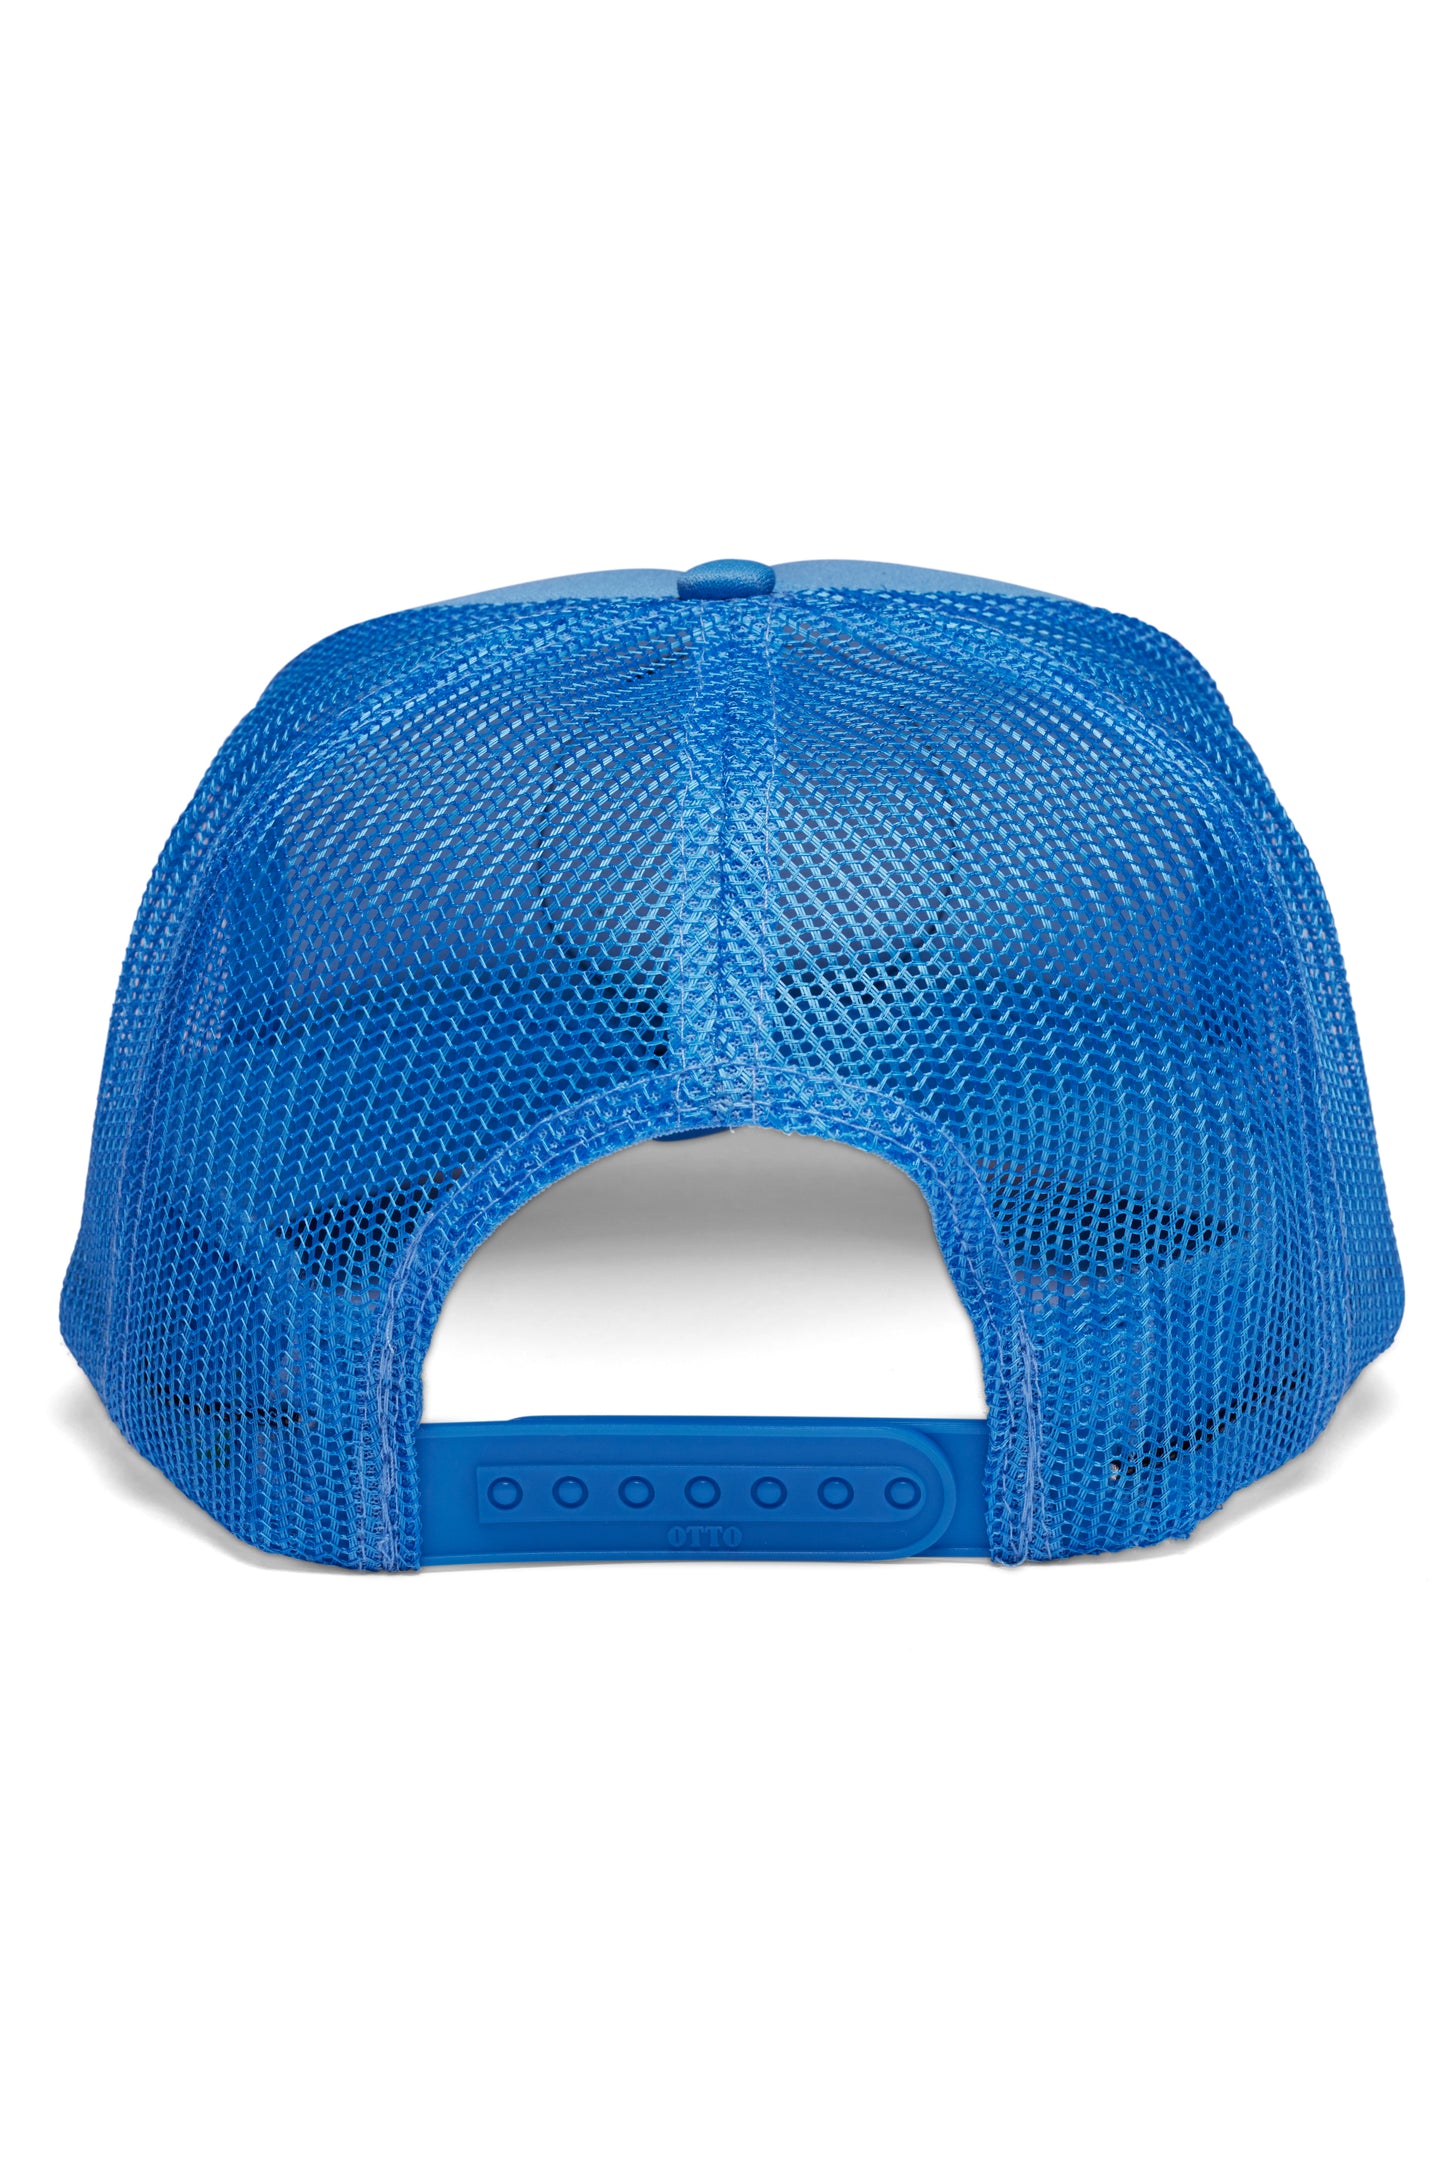 Unisex trucker hat featuring a versatile design with breathable mesh panels and adjustable snapback closure